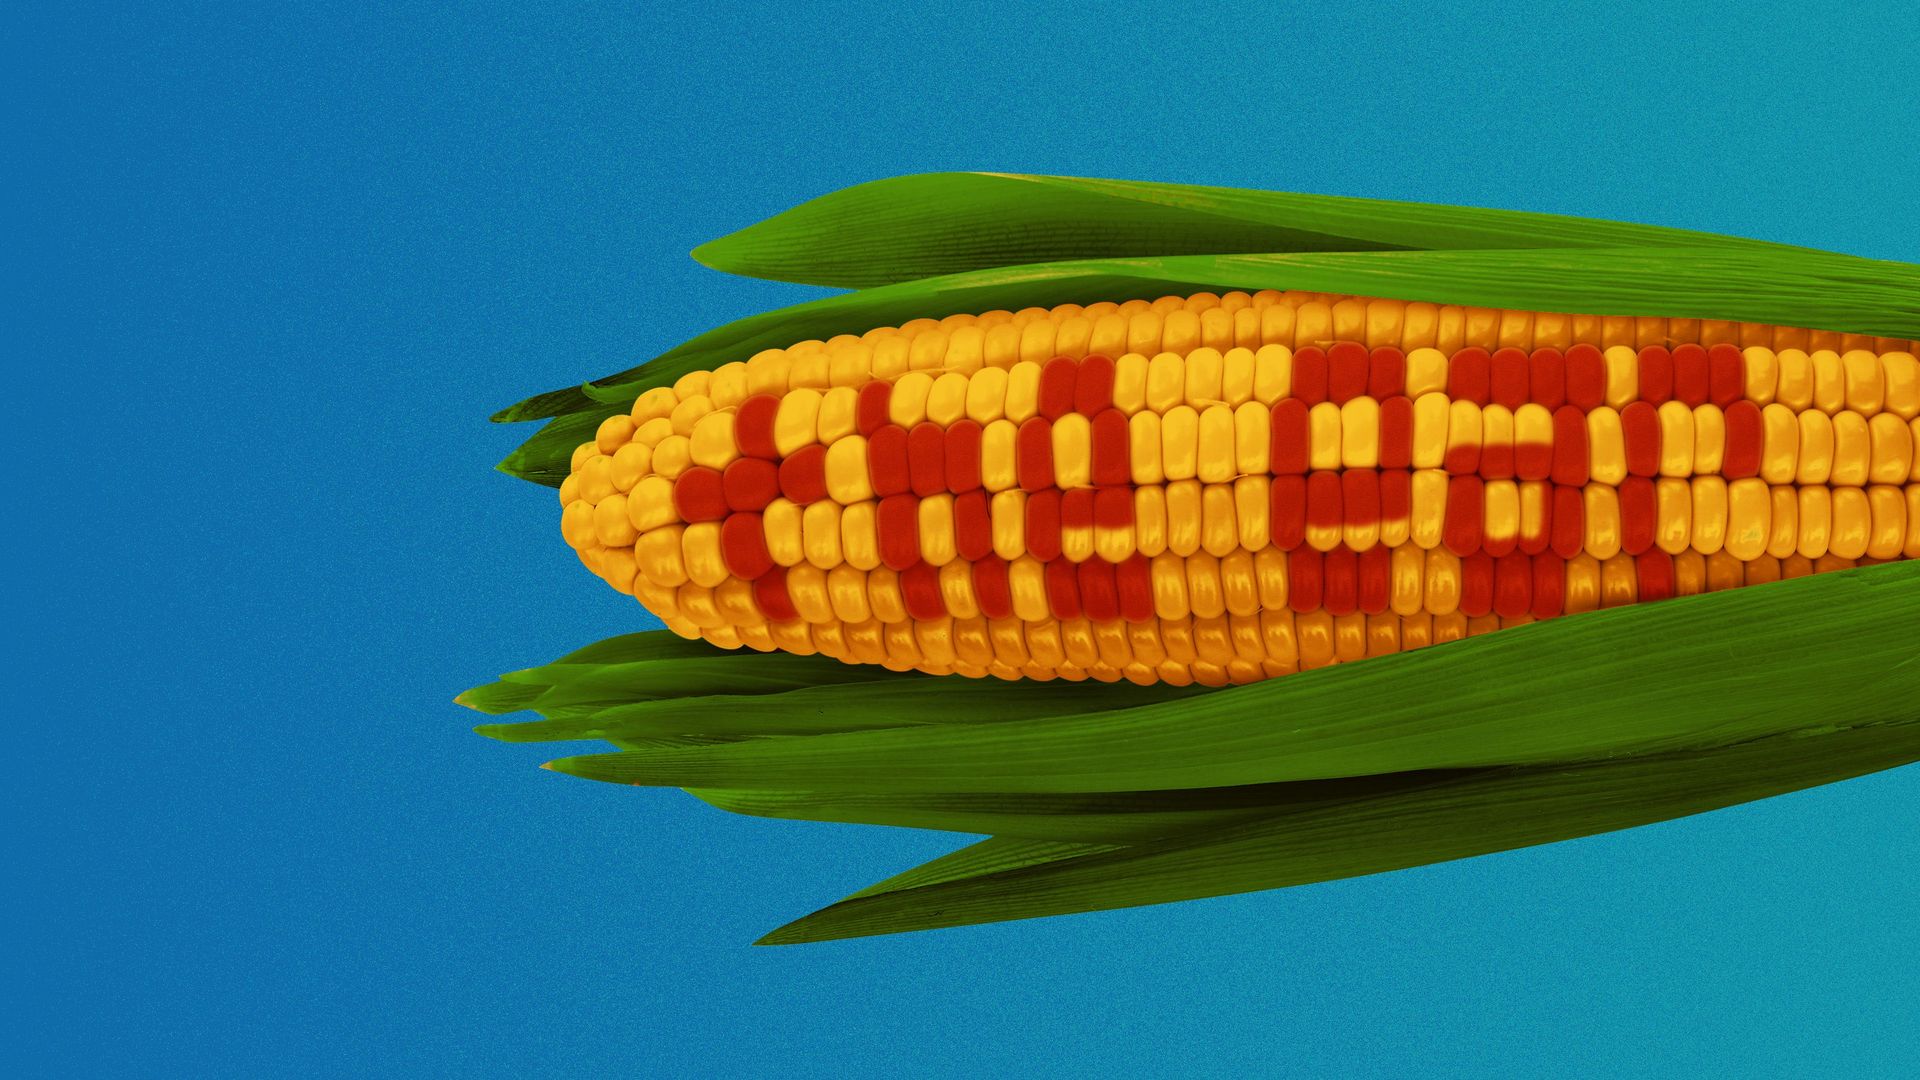 Illustration of a husk of corn with "The Ear" written in kernnals.